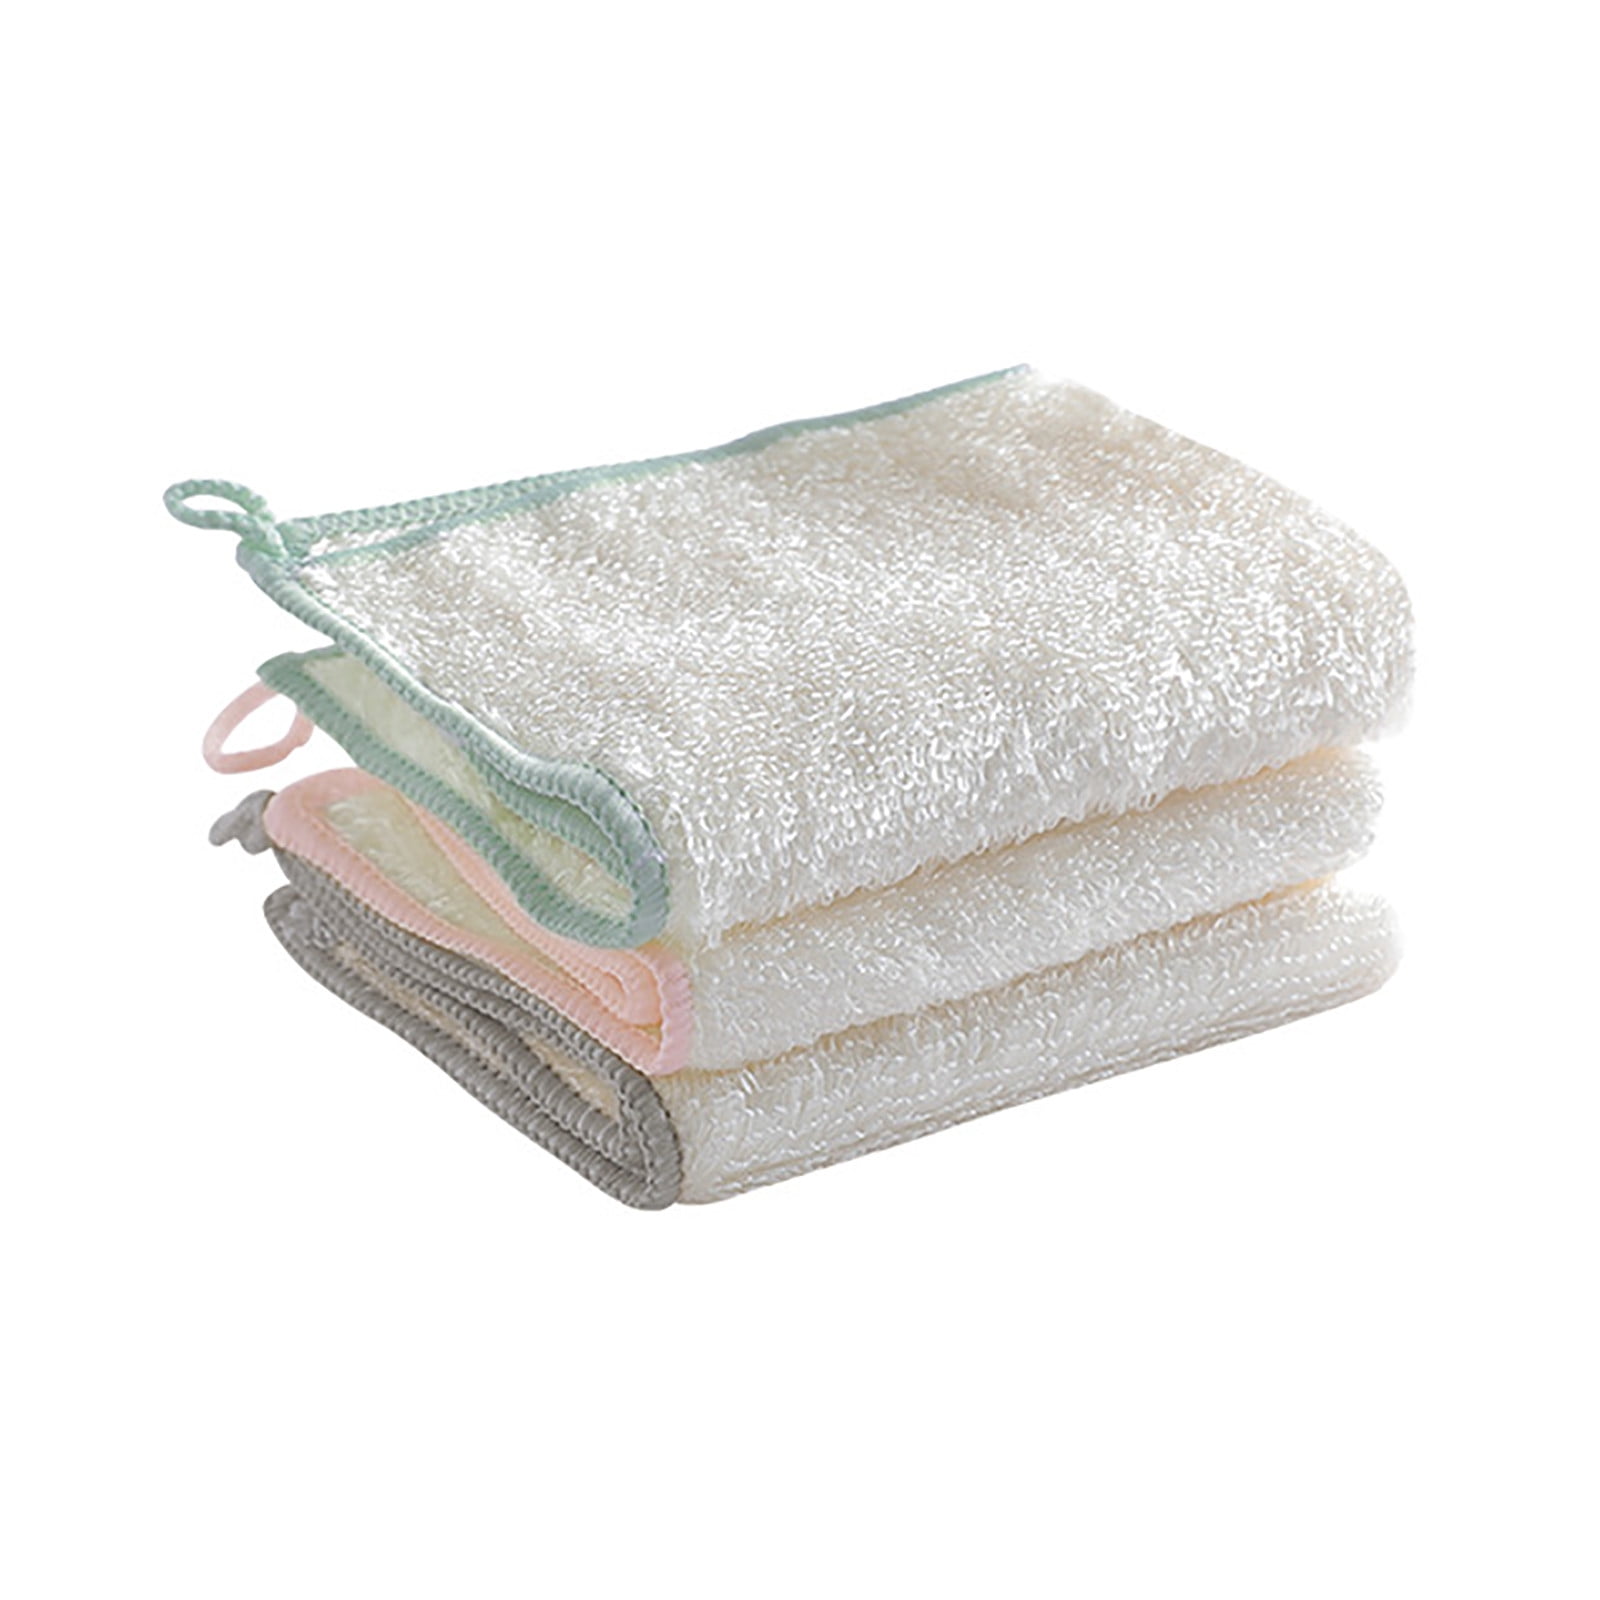 Cleaning 101: How to Wash White Towels